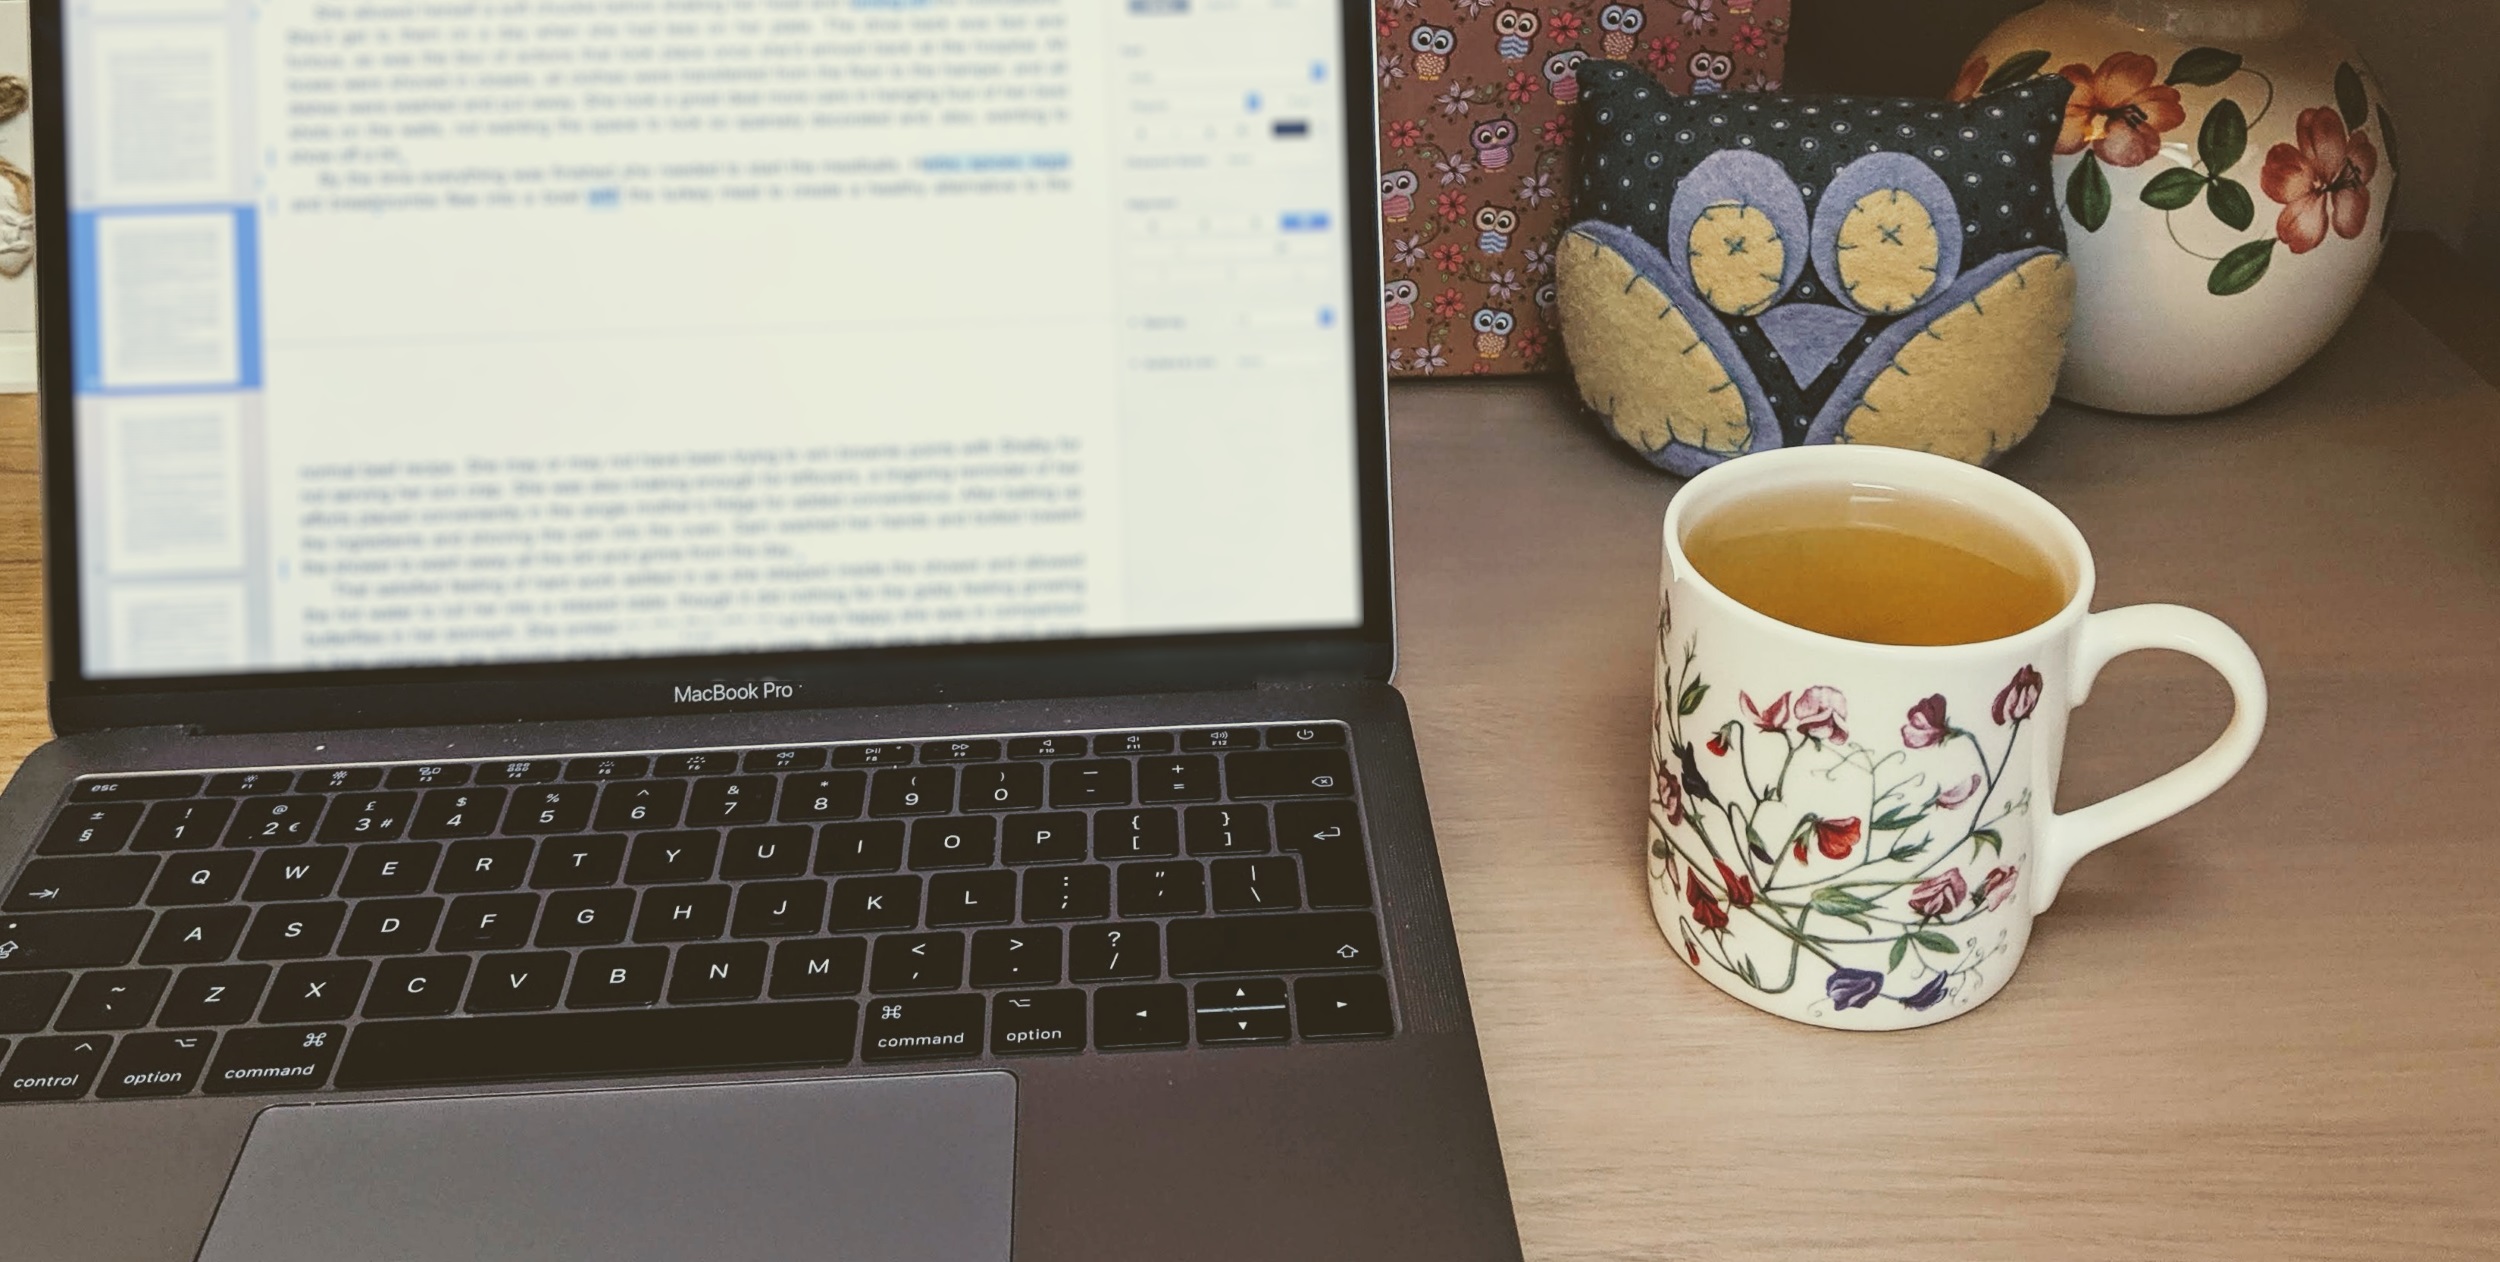 A picture of a laptop, flowered mug, and stuffed owl